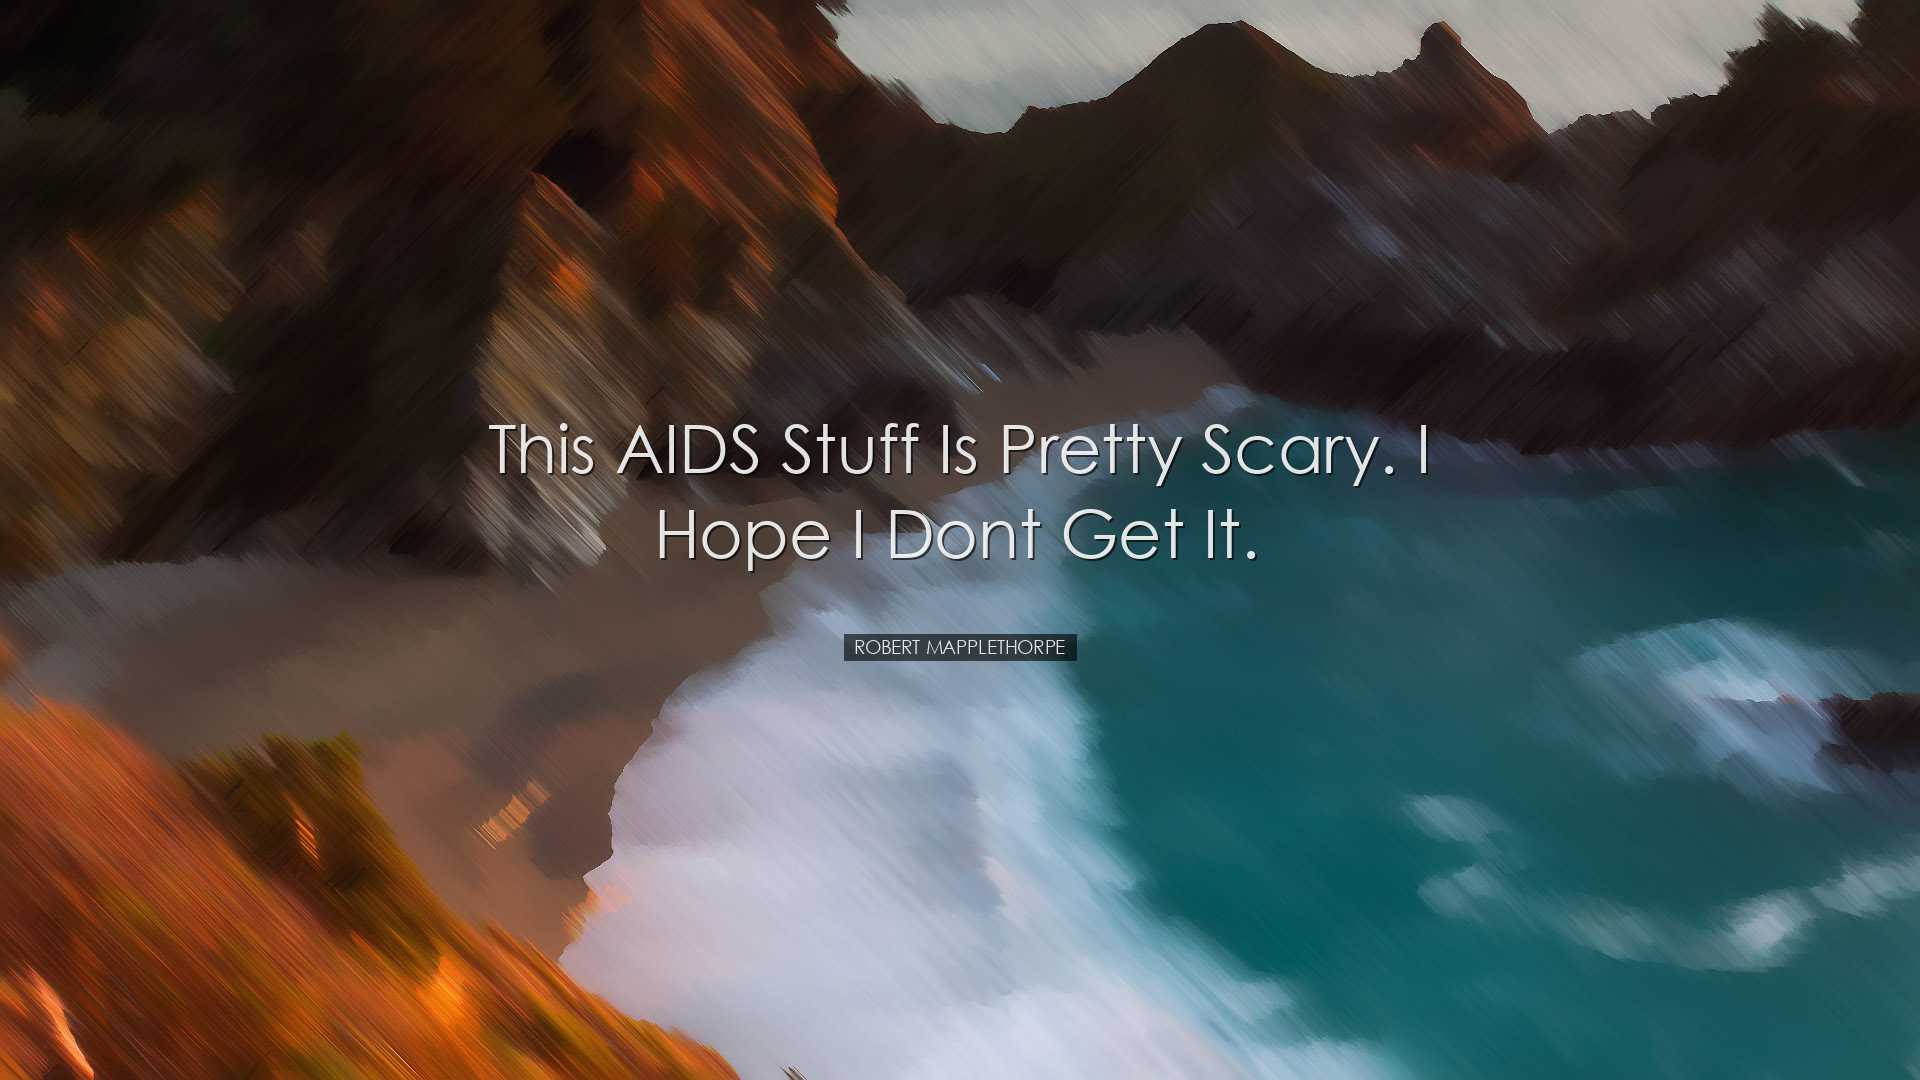 This AIDS stuff is pretty scary. I hope I dont get it. - Robert Ma